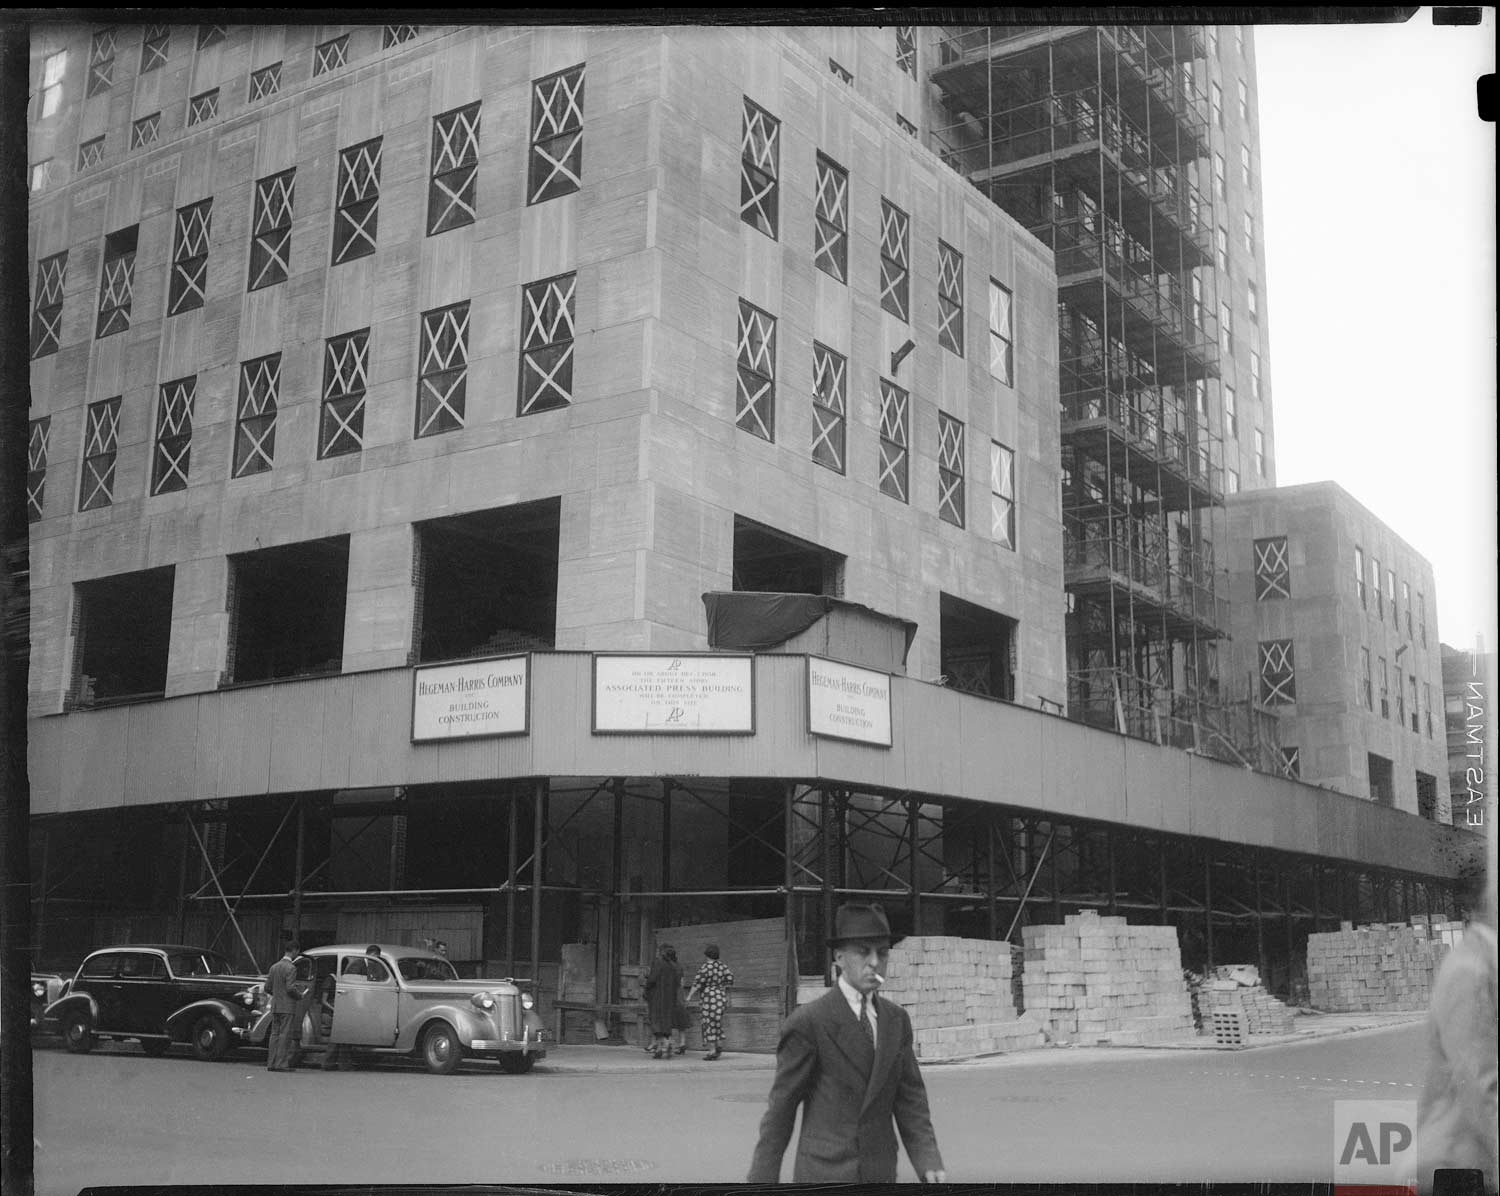  The new Associated Press building is shown under construction at Rockefeller Center, New York, Oct. 8, 1938. (AP Photo/Corporate Archives) 